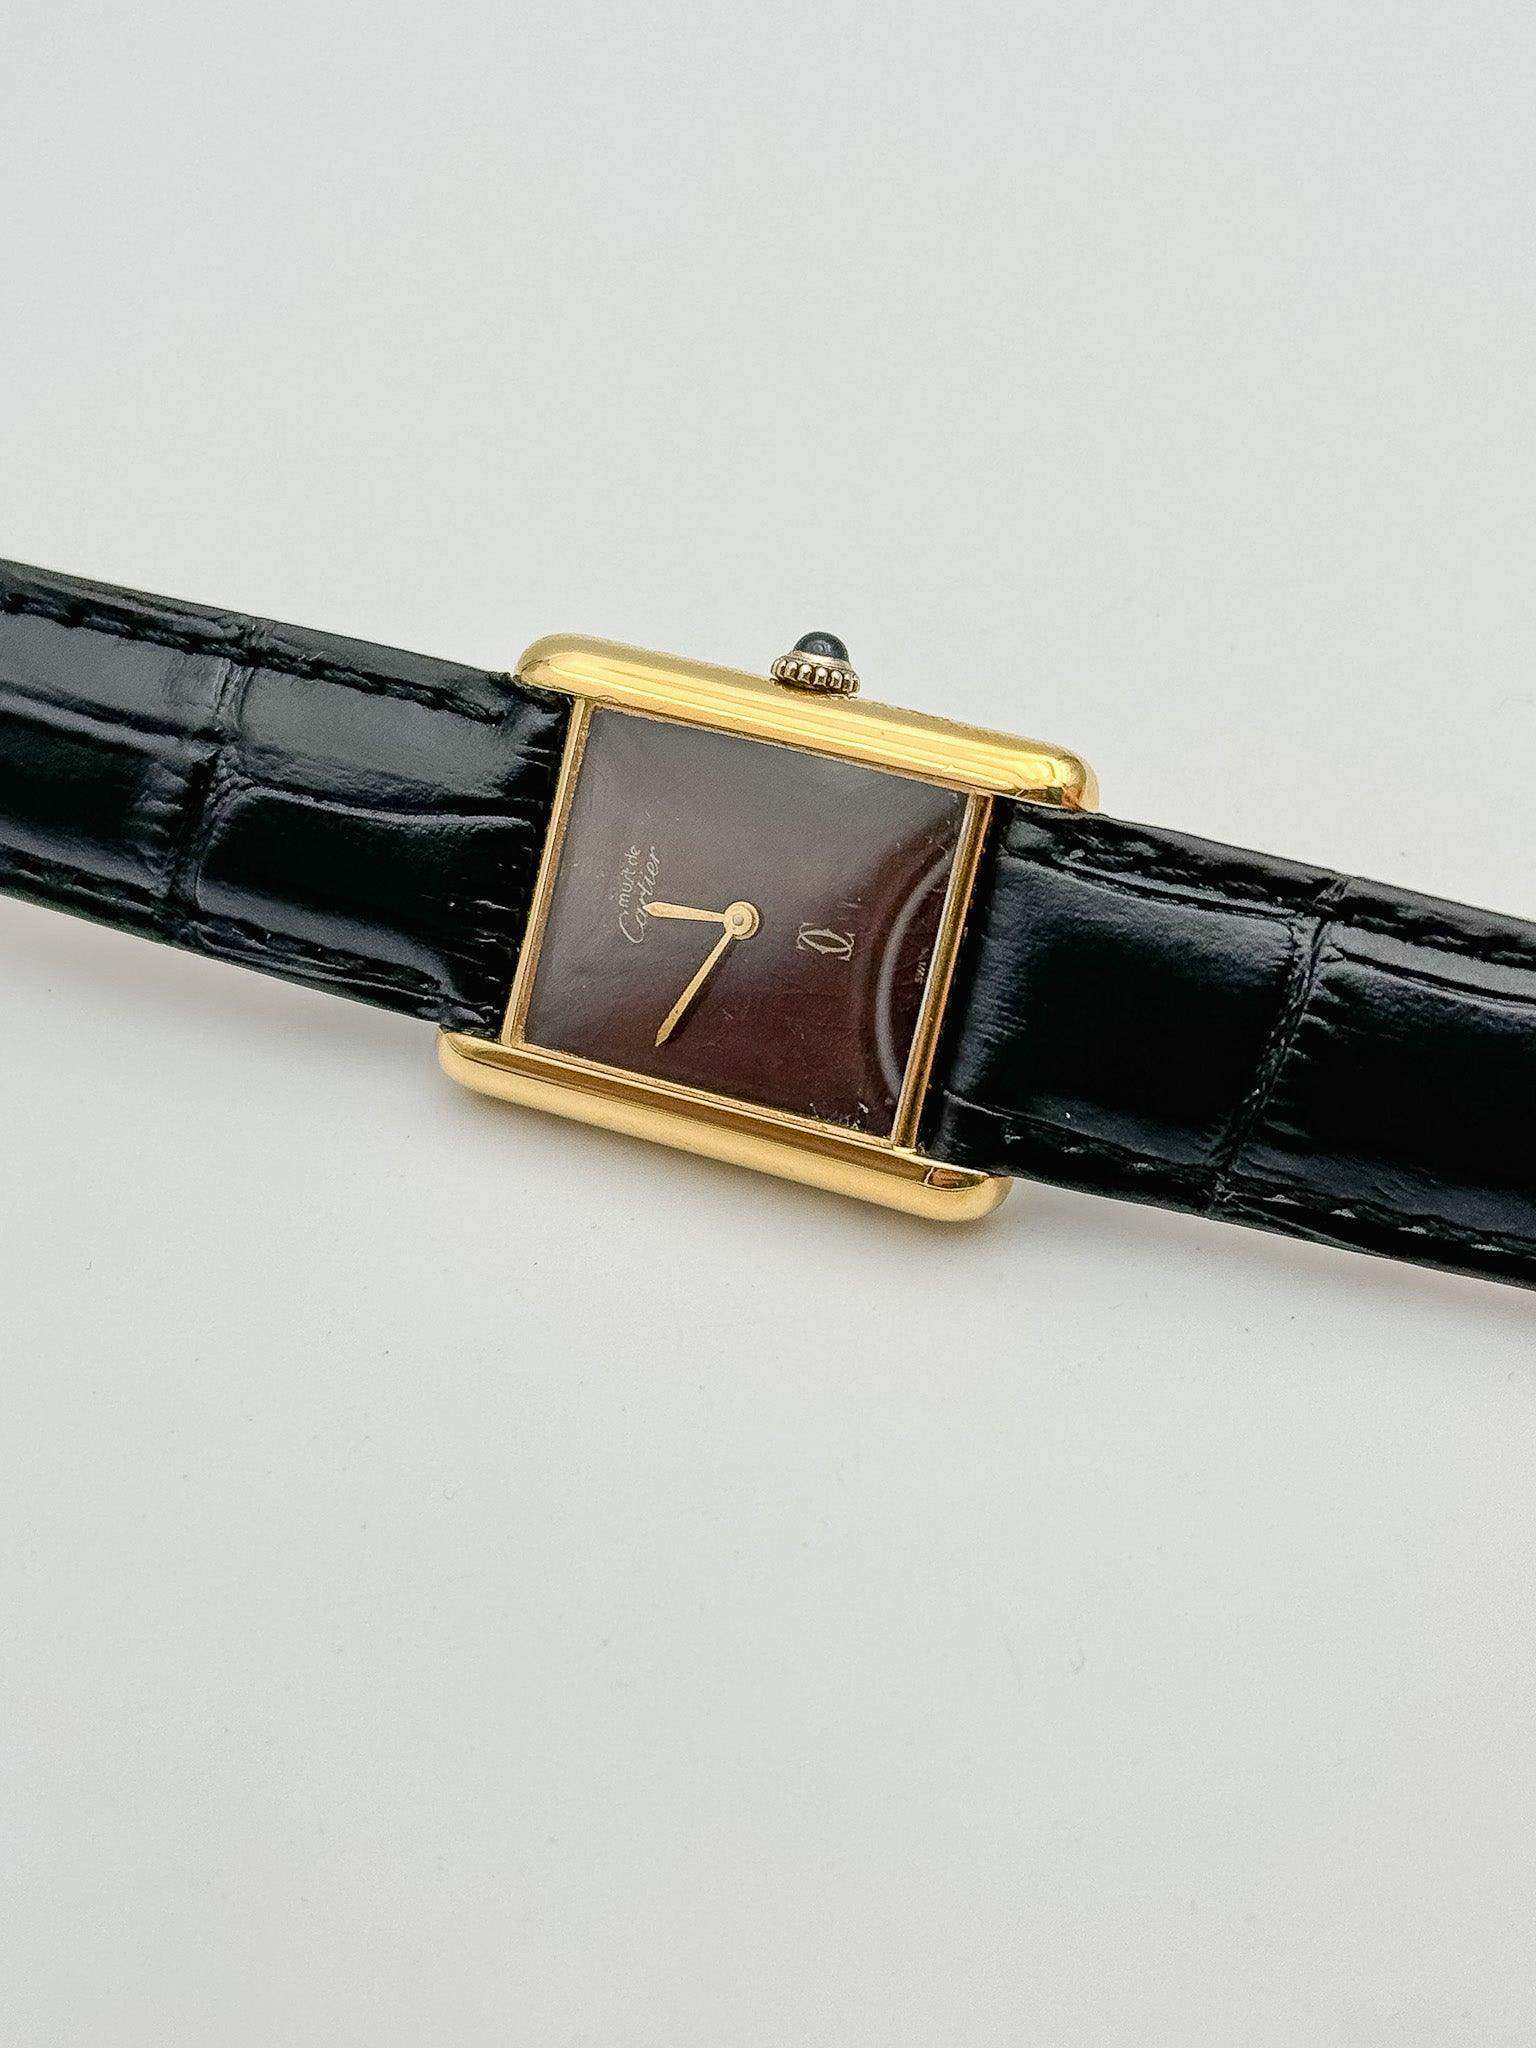 Cartier - Tank Must Wood Spider Dial - 1980’s - Atelier Victor